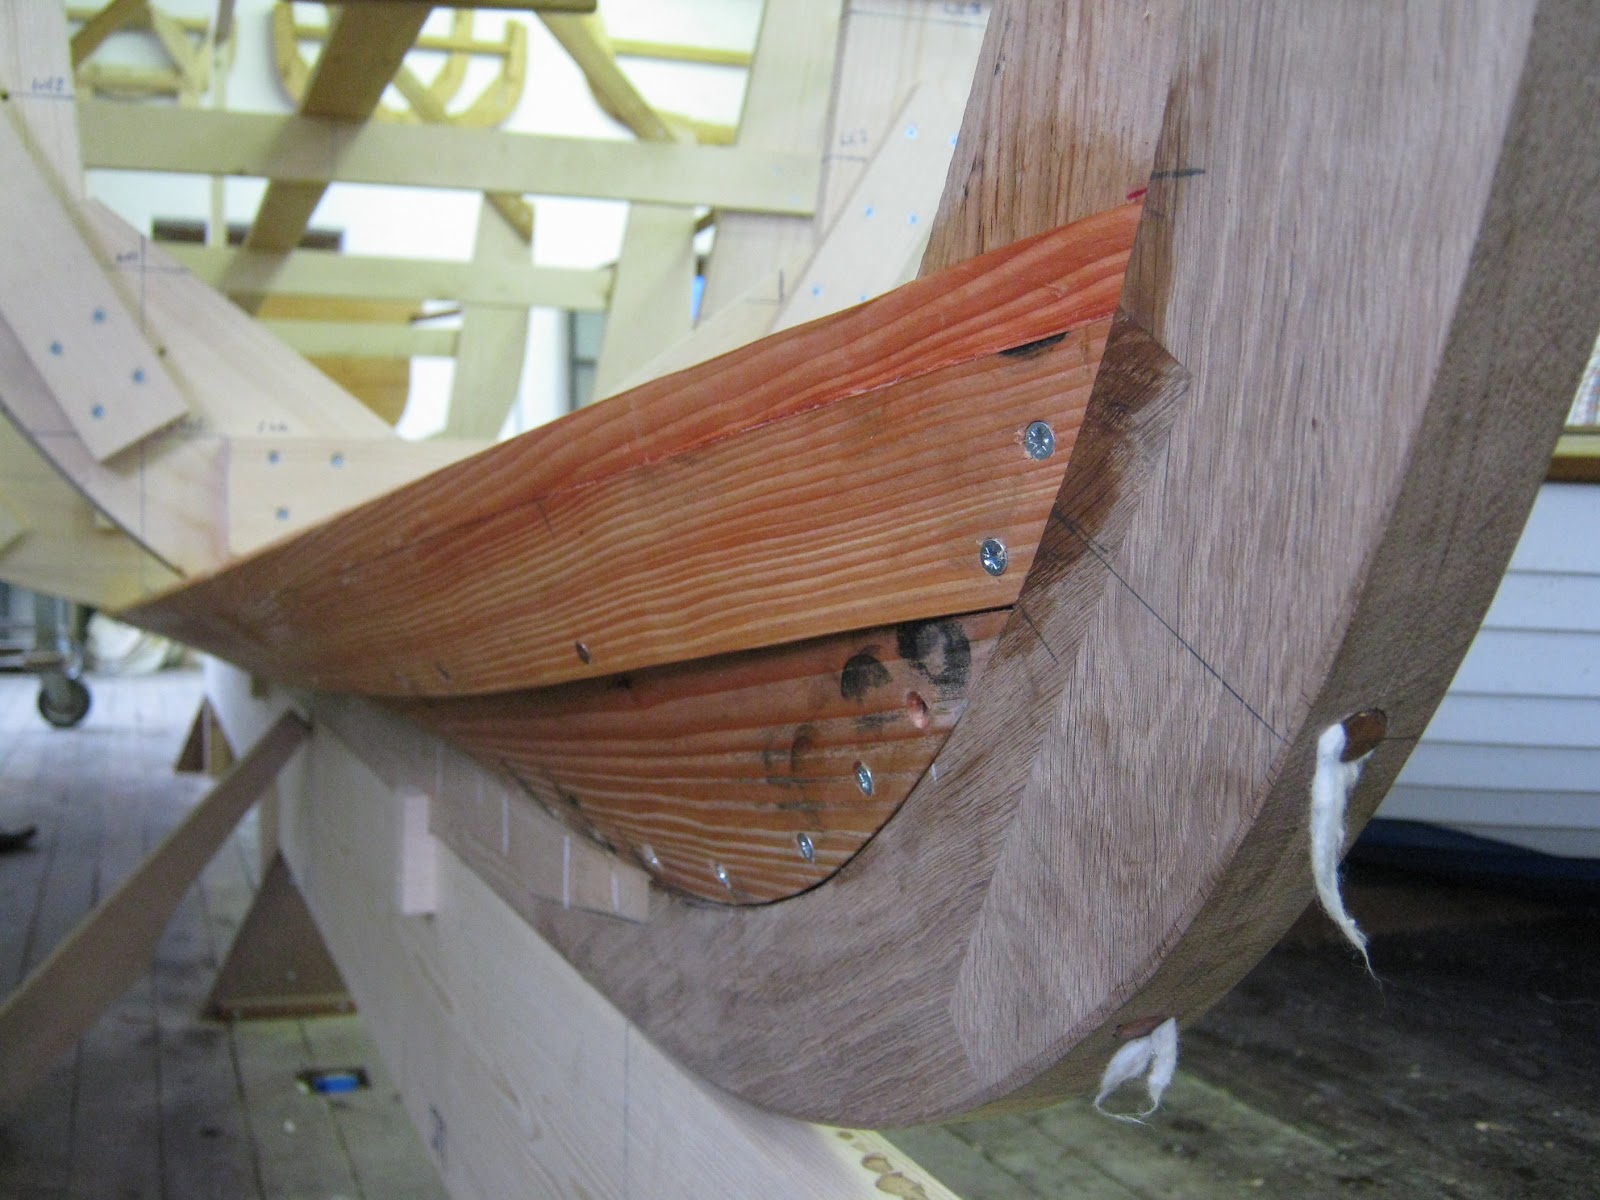  boat building plans lapstrake boat plans wooden boat building how to